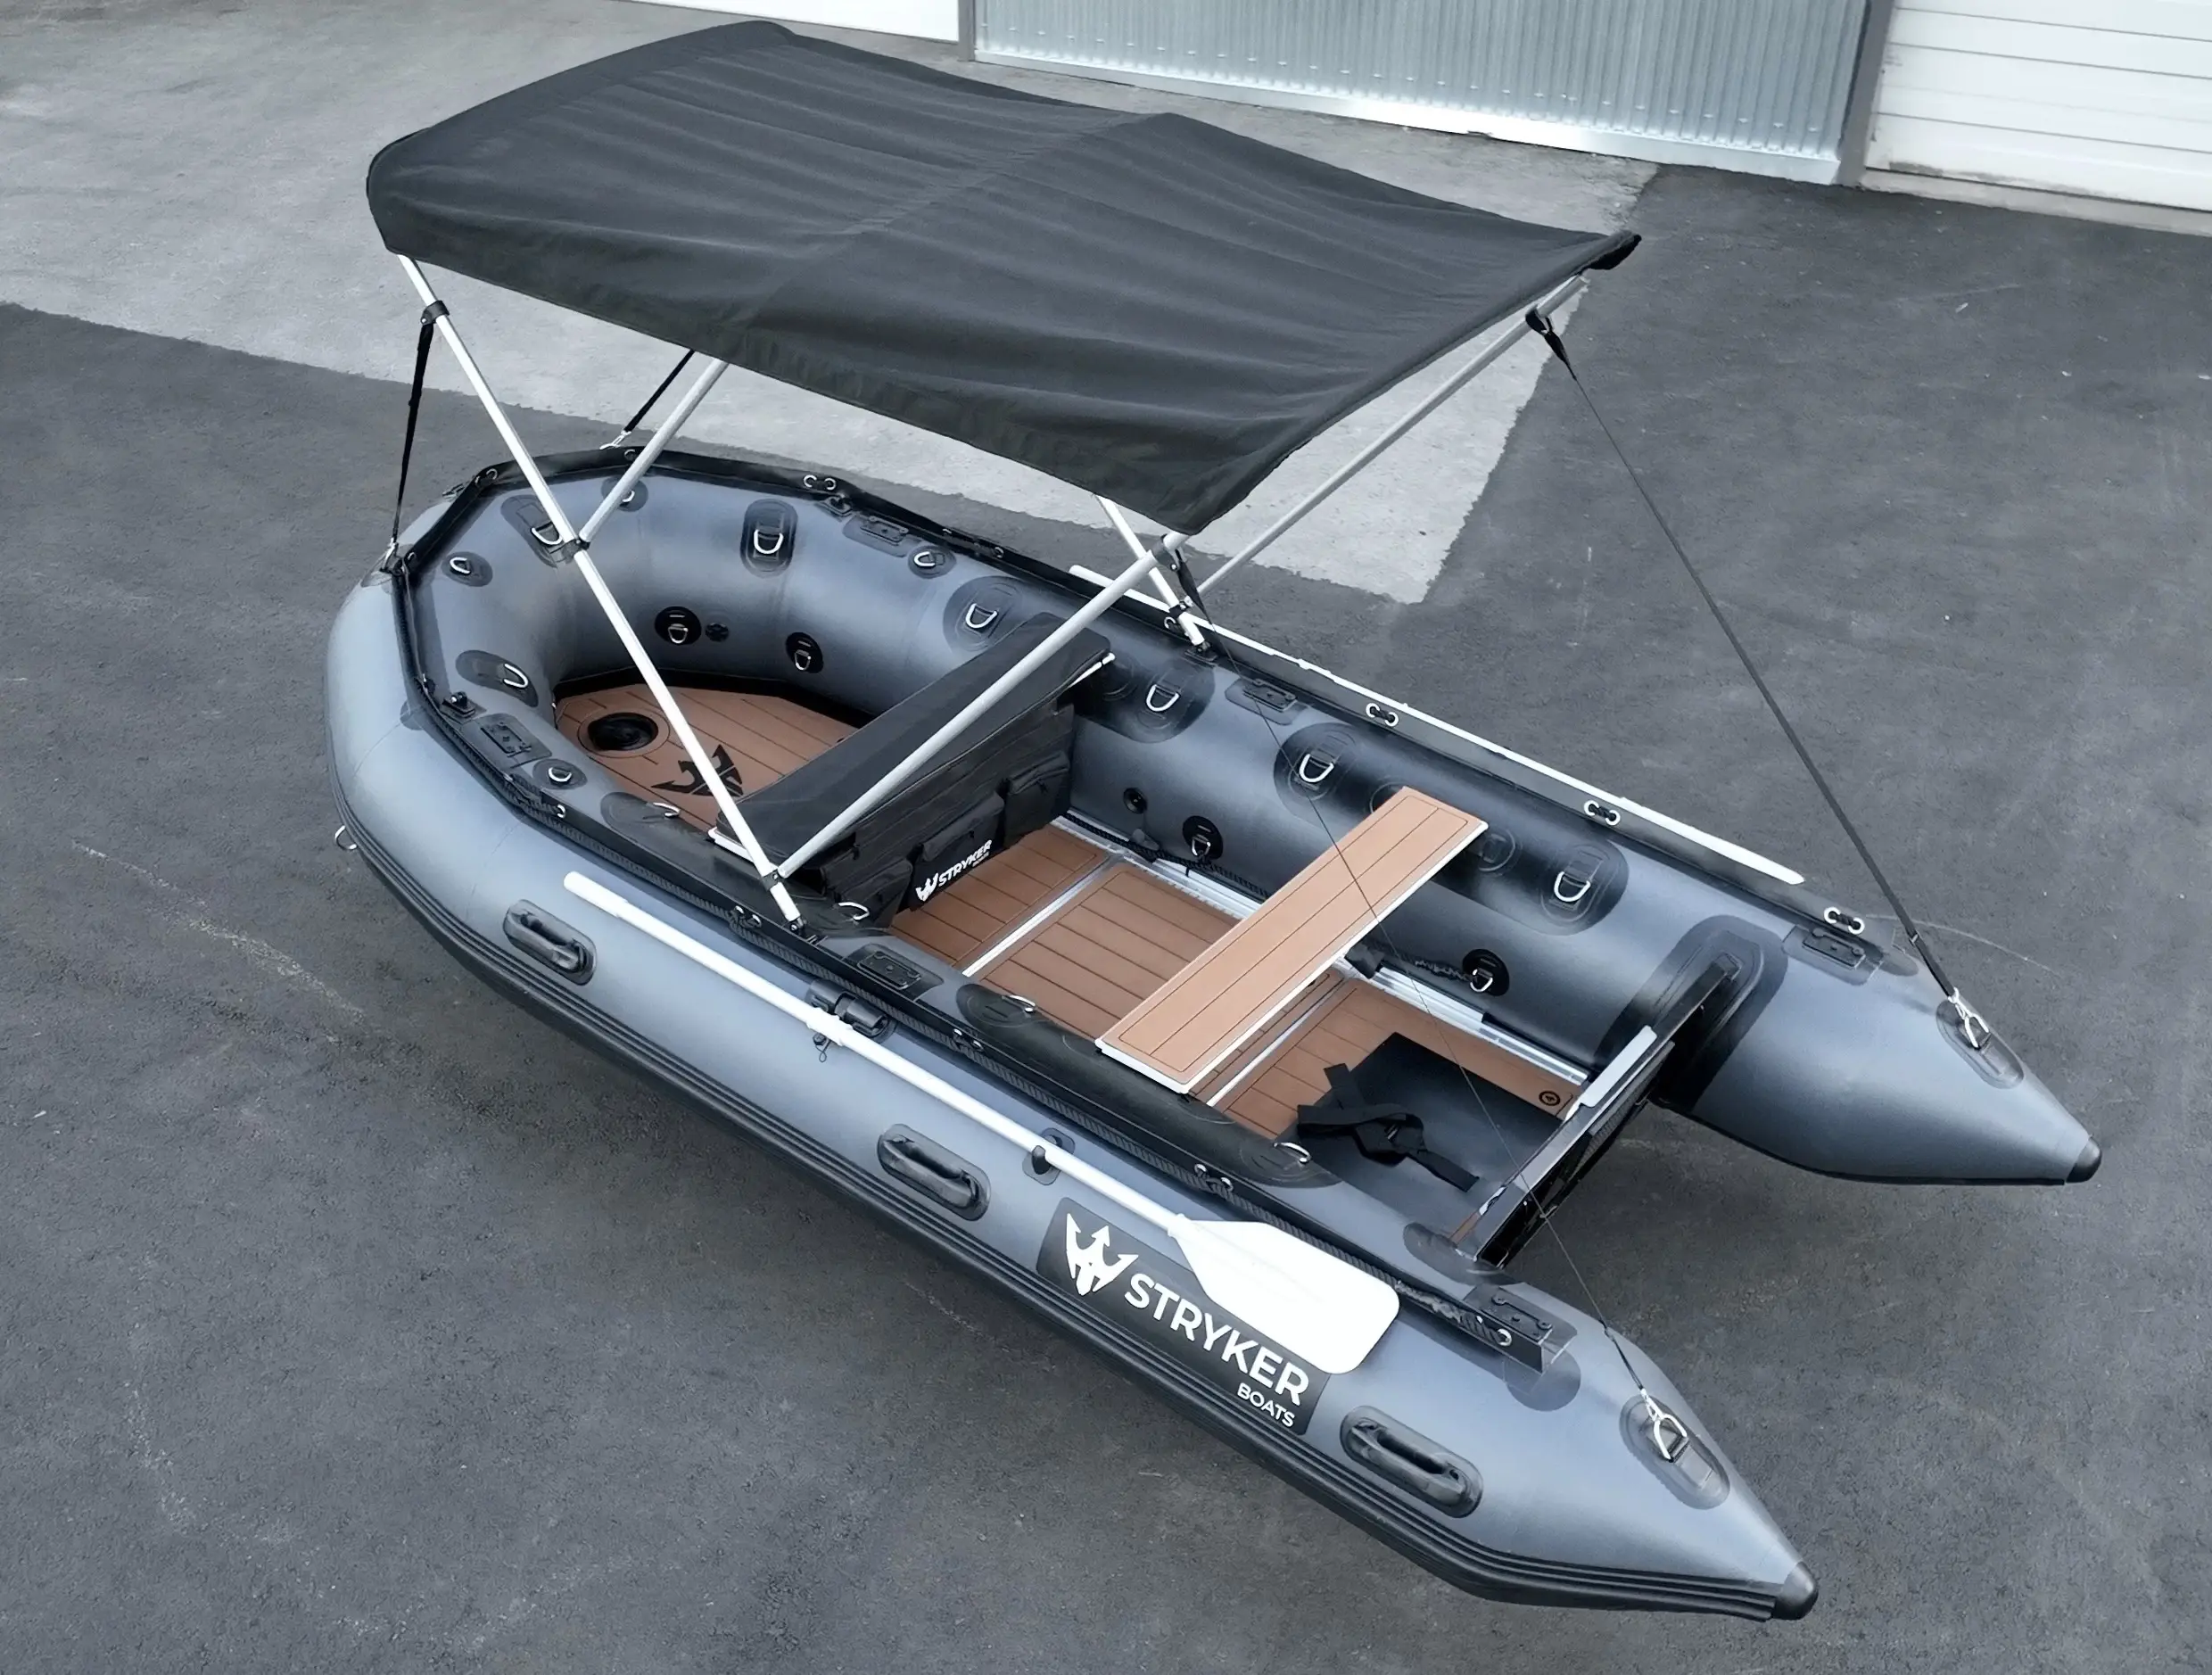 Stryker PRO 380 (12' 5”) Inflatable Boat